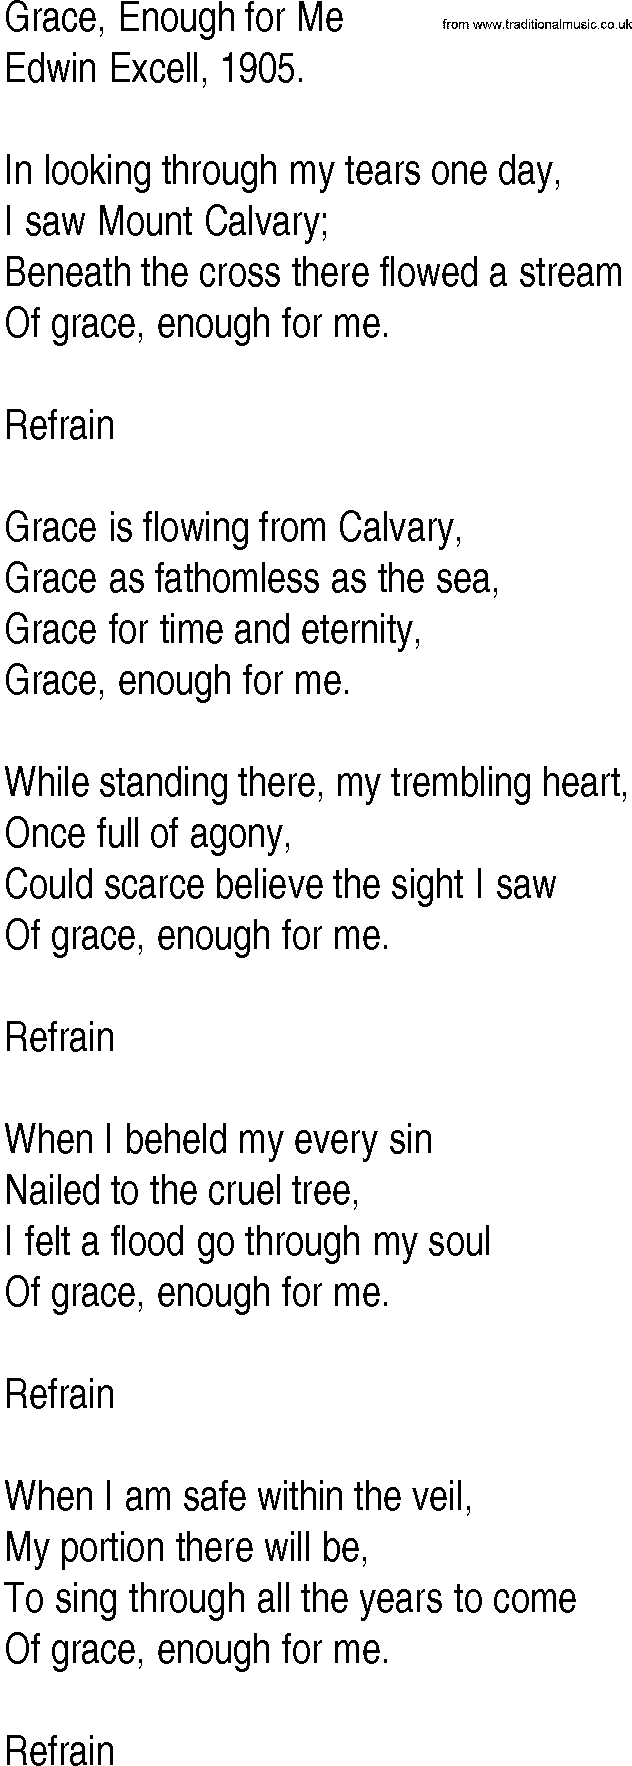 Hymn and Gospel Song: Grace, Enough for Me by Edwin Excell lyrics